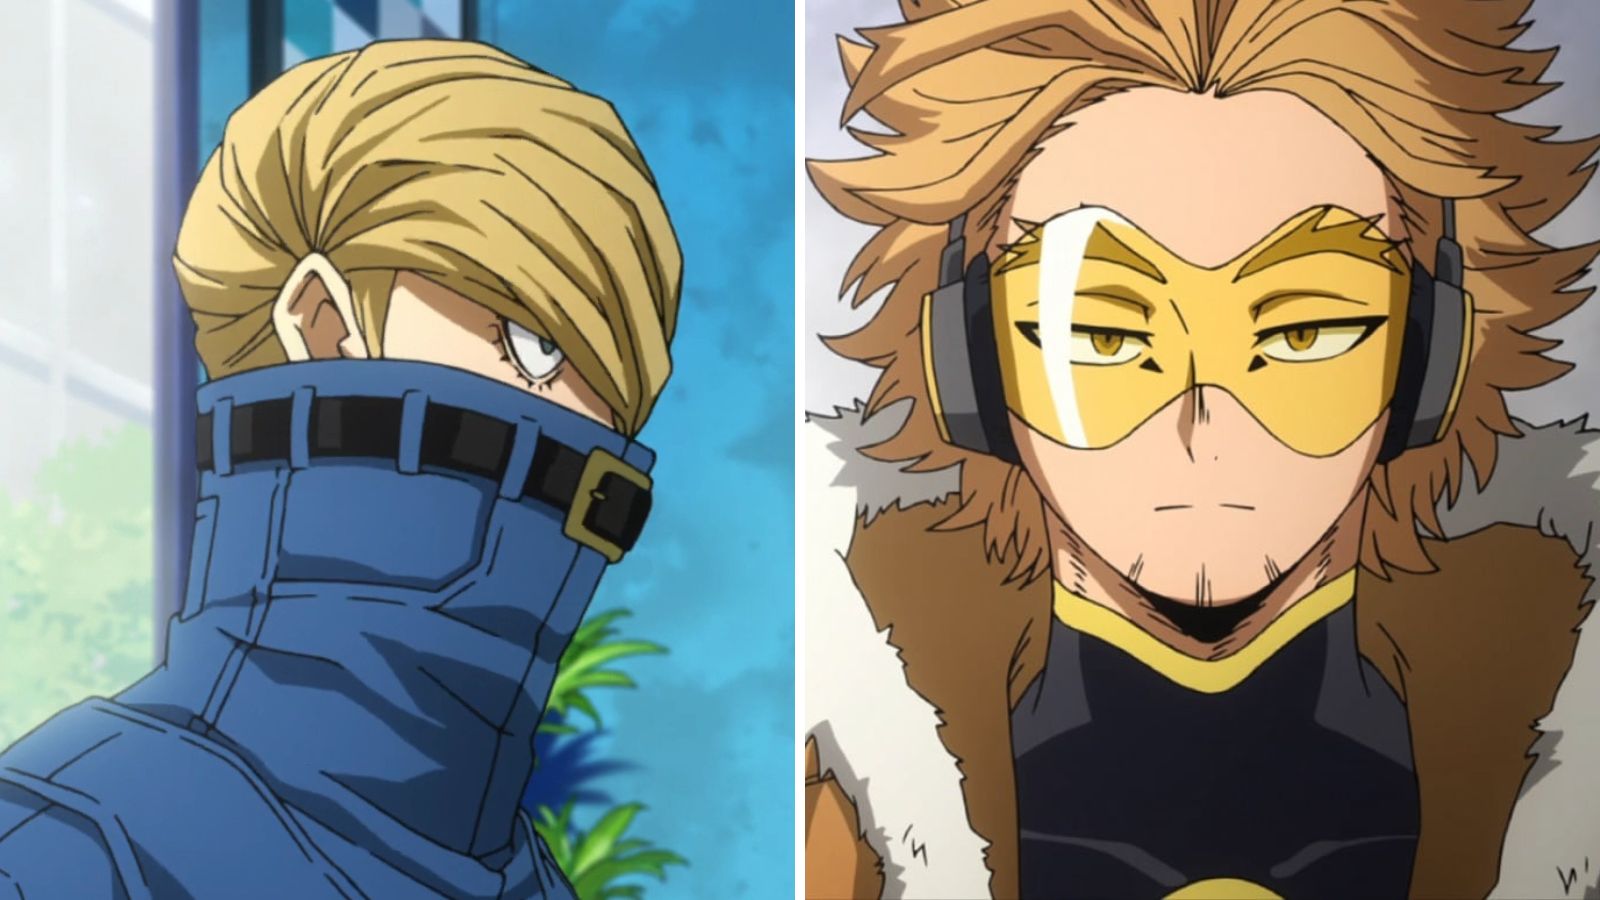 Best Jeanist and Hawks from My Hero Academia